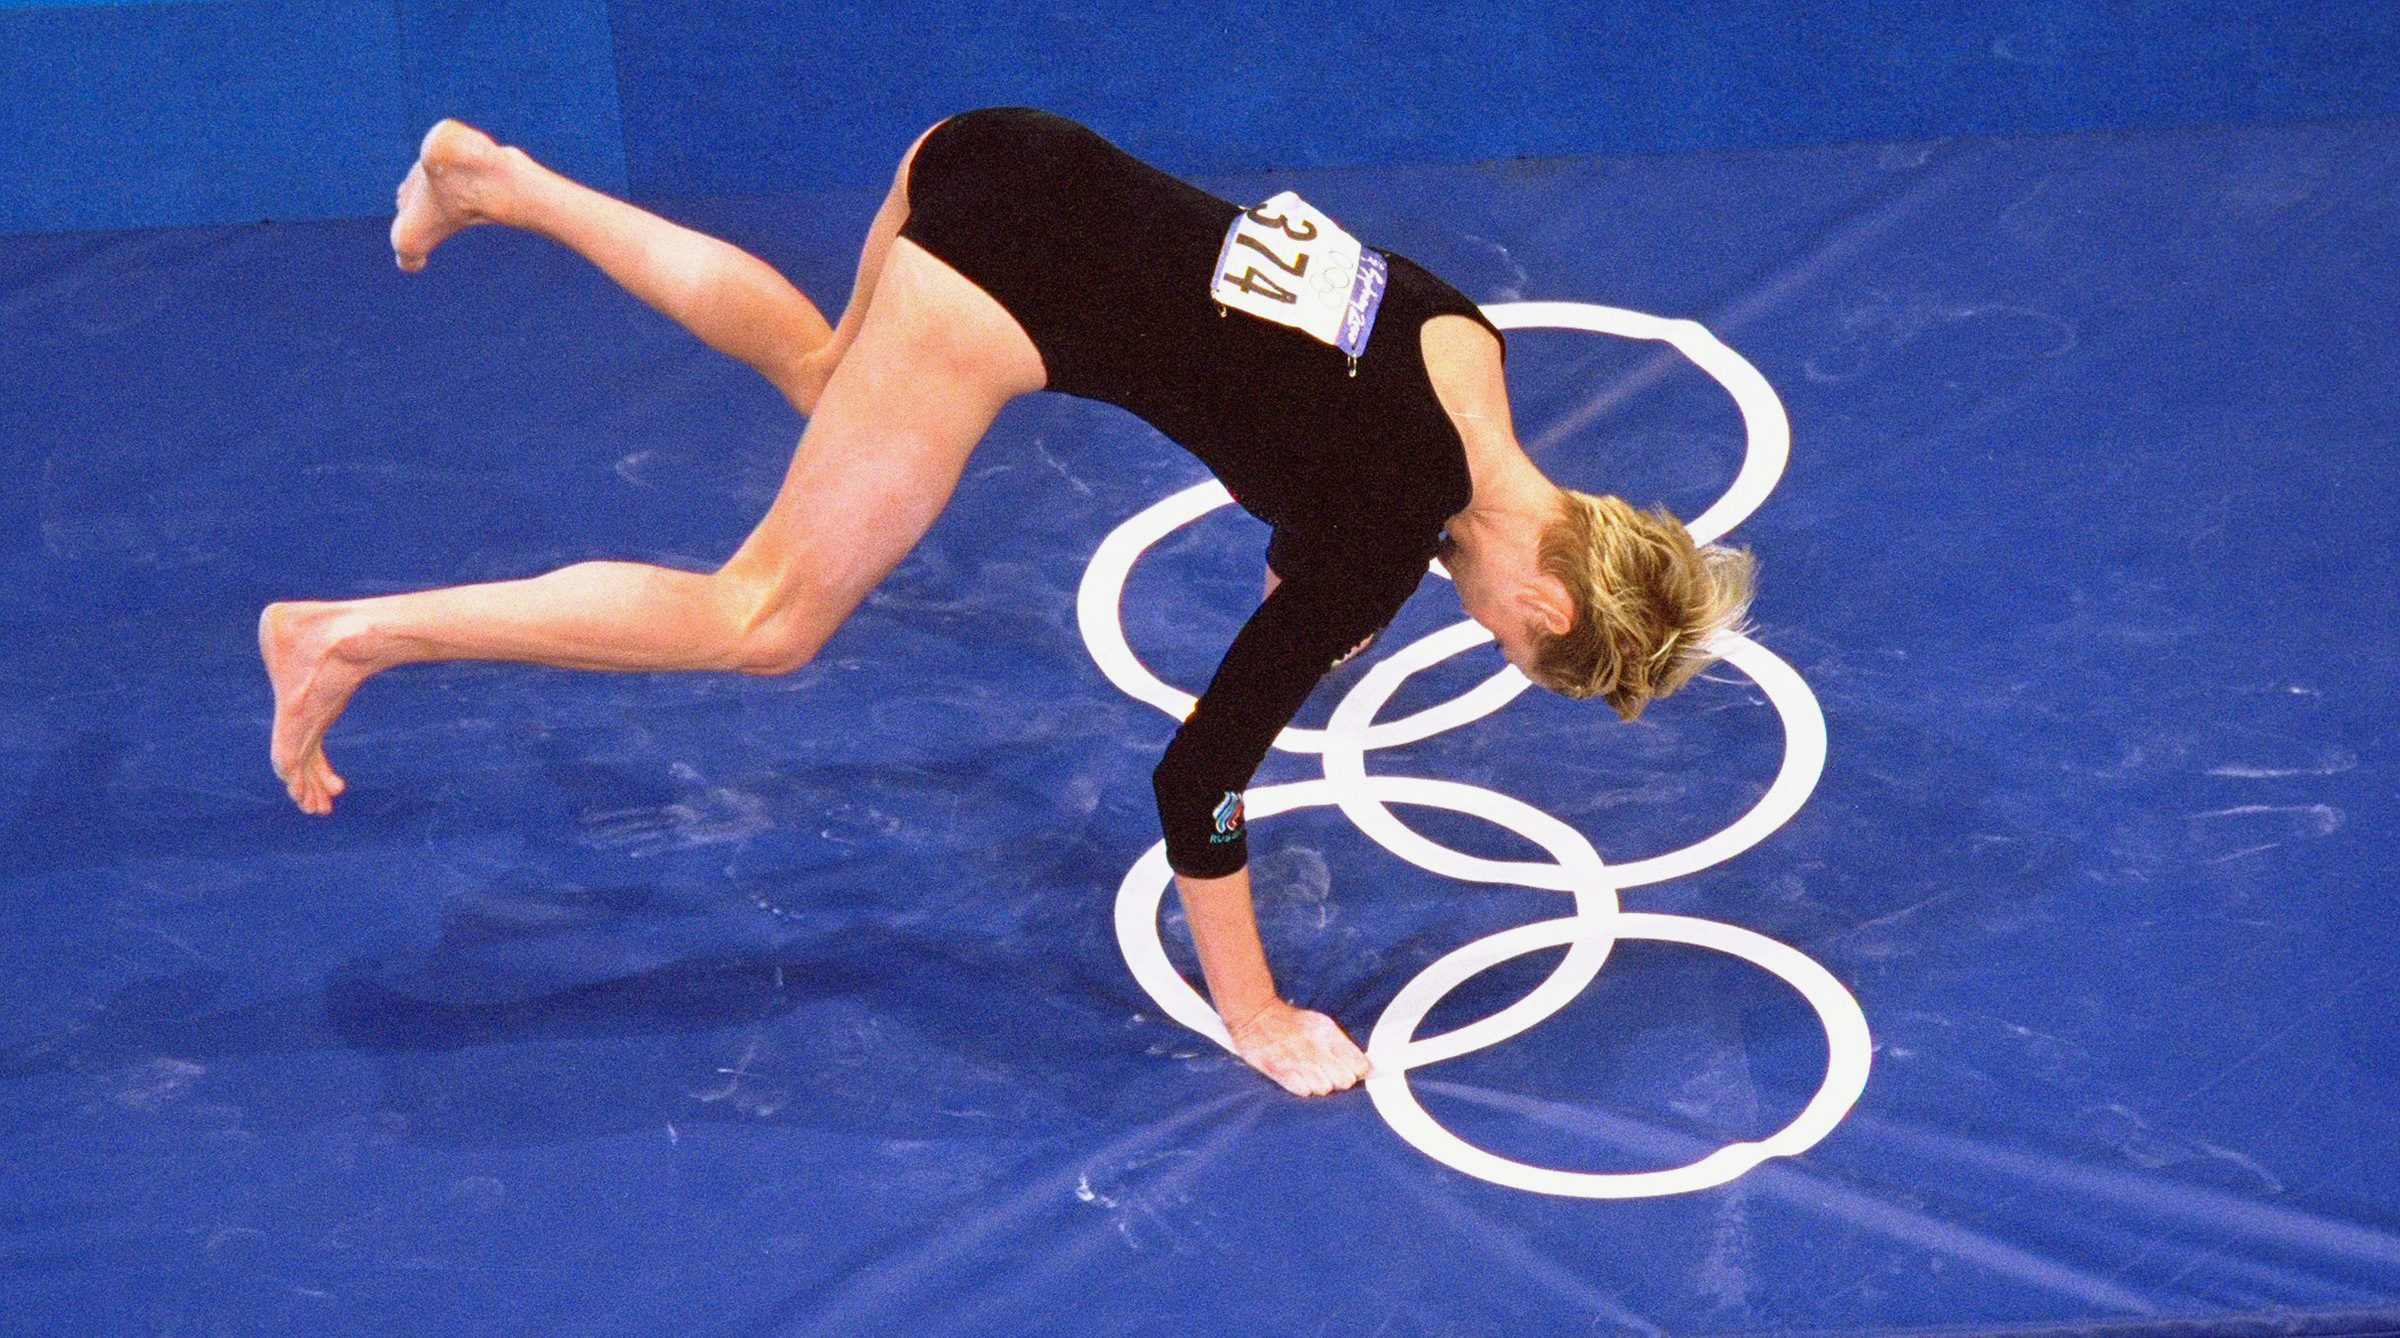 Svetlana Khorkina falls on the vault at the 2000 Olympics in Sydney. It was not her fault.